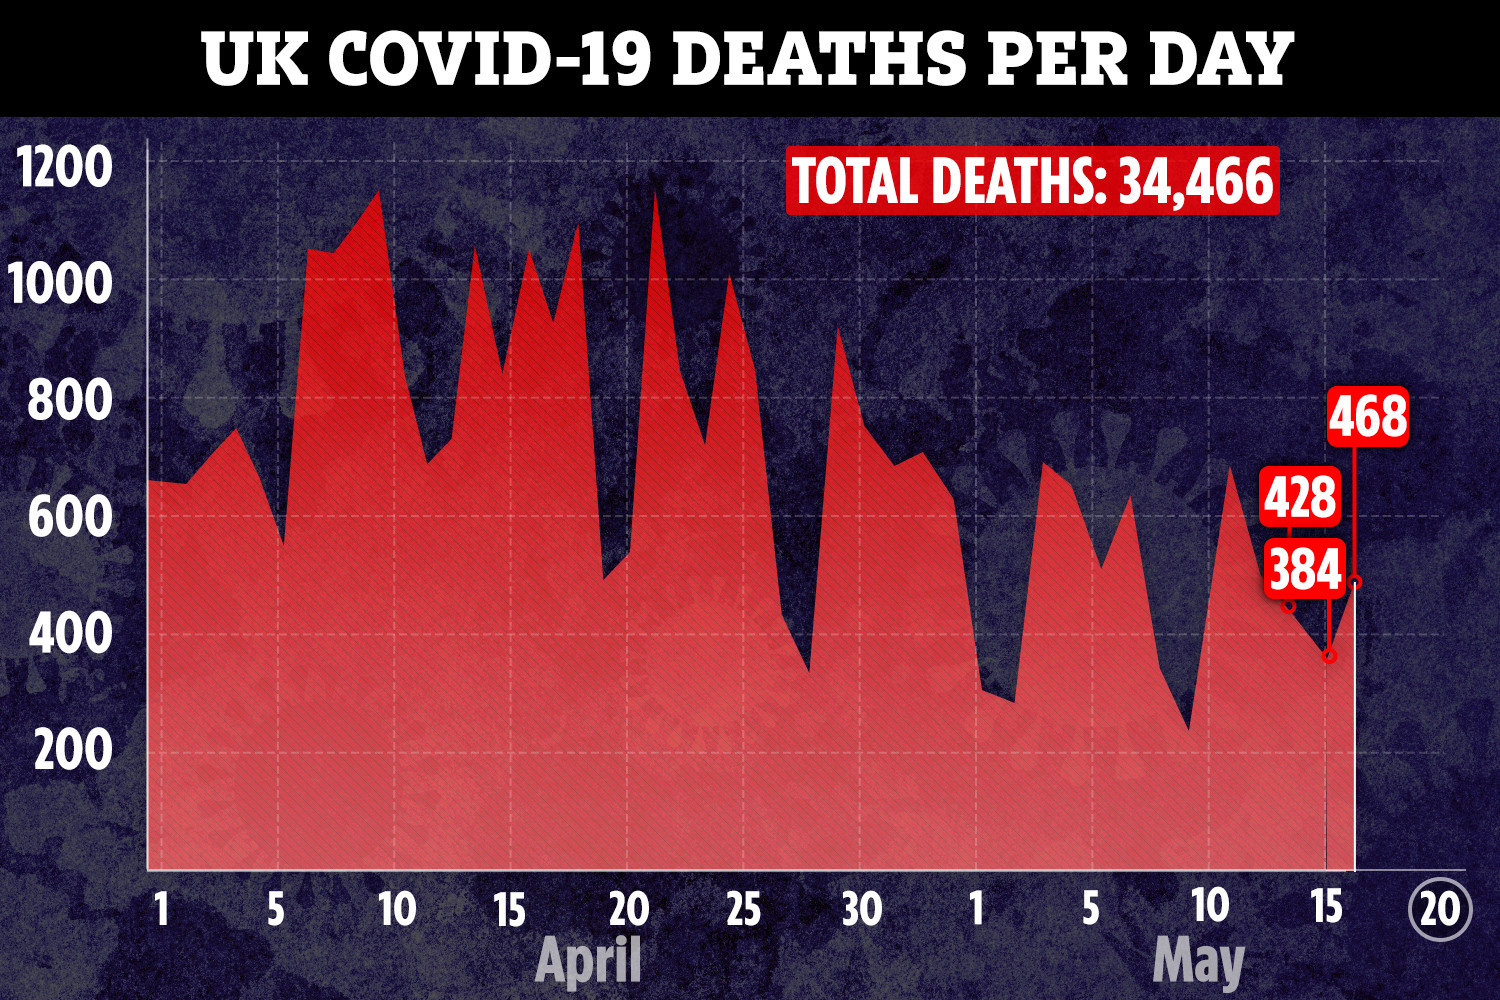 UK COVID-19 Deaths Rise To 34,466 After Another 468 Patients Die